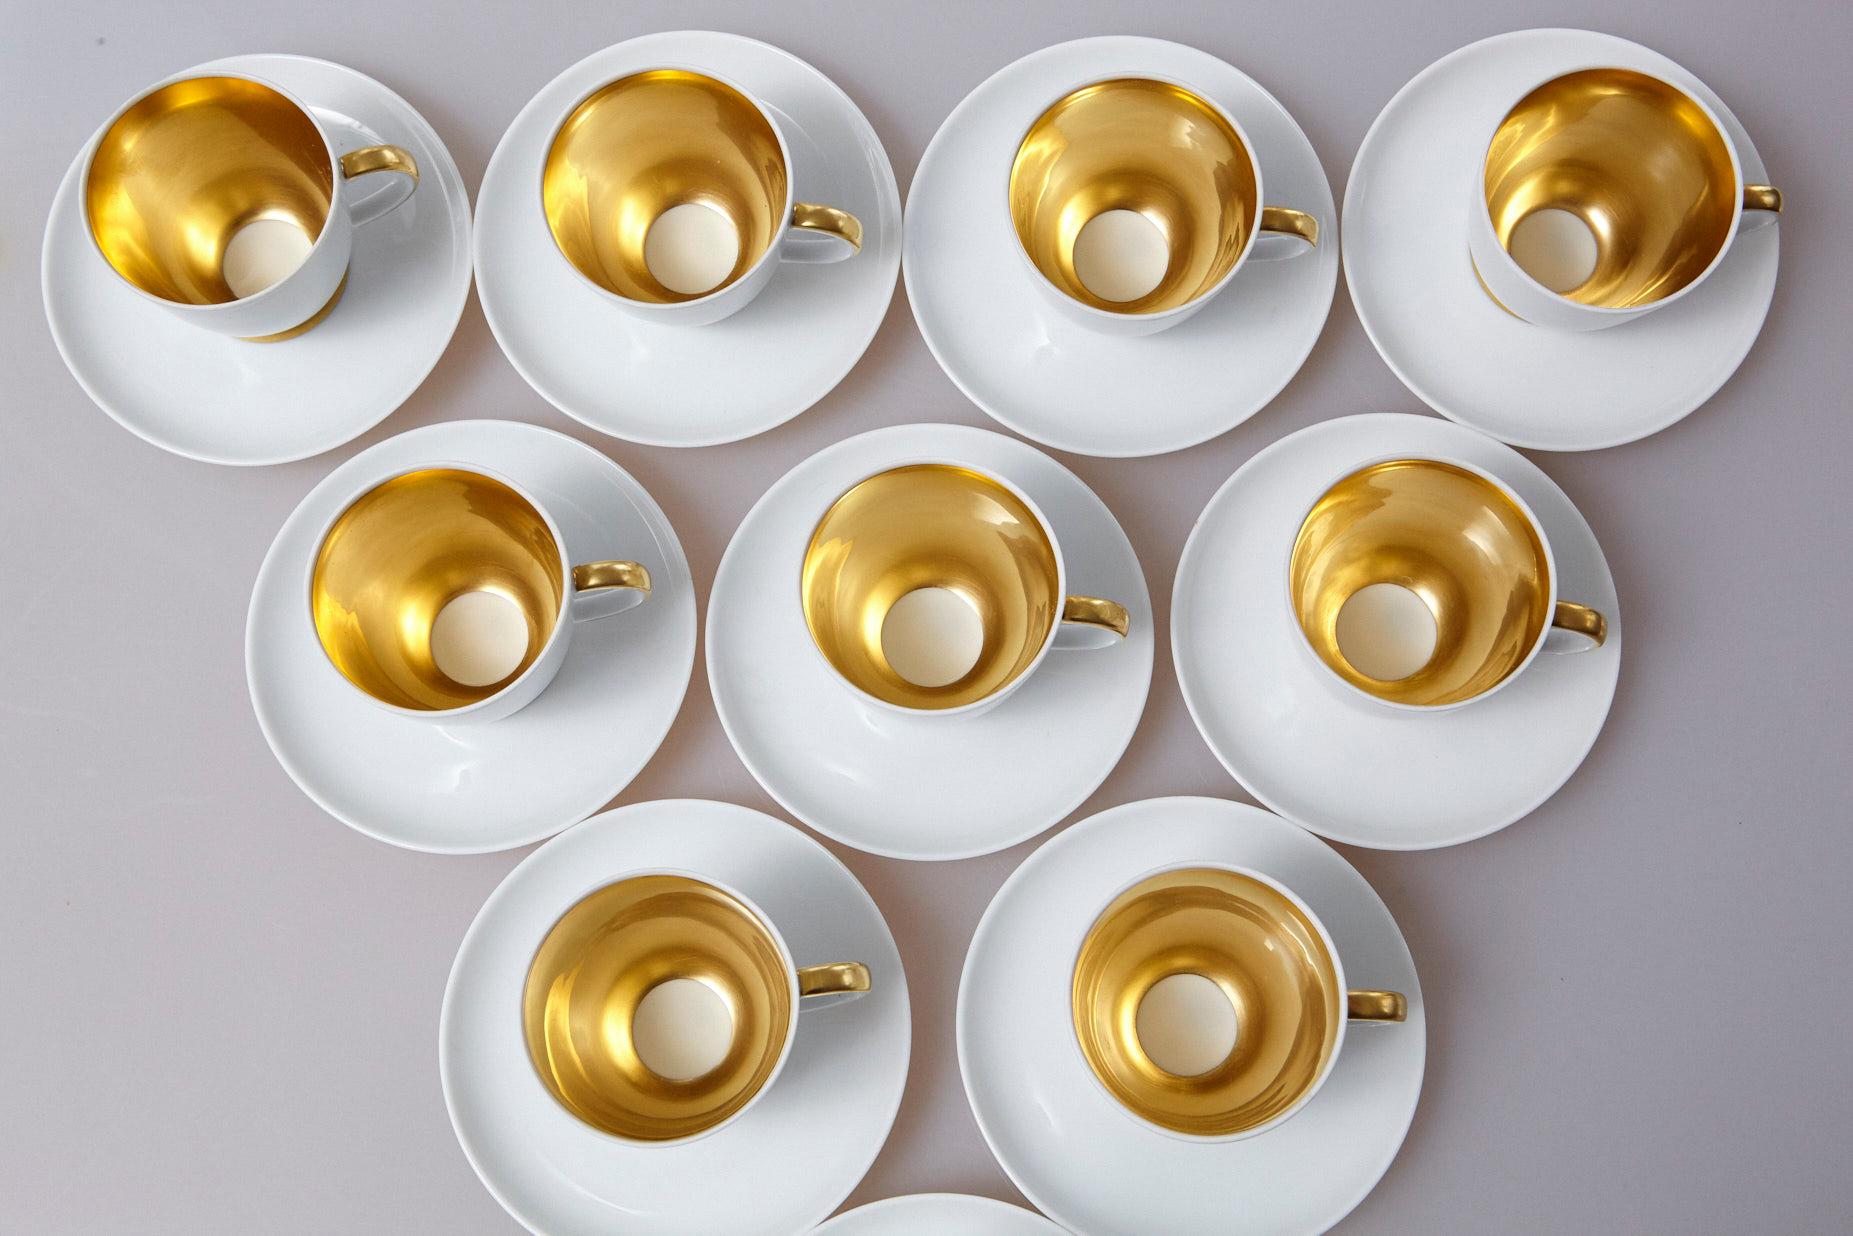 Mid-20th Century Set of 10 White and Gold Fürstenberg Porcelain Demitasse Cups & Saucers, Germany